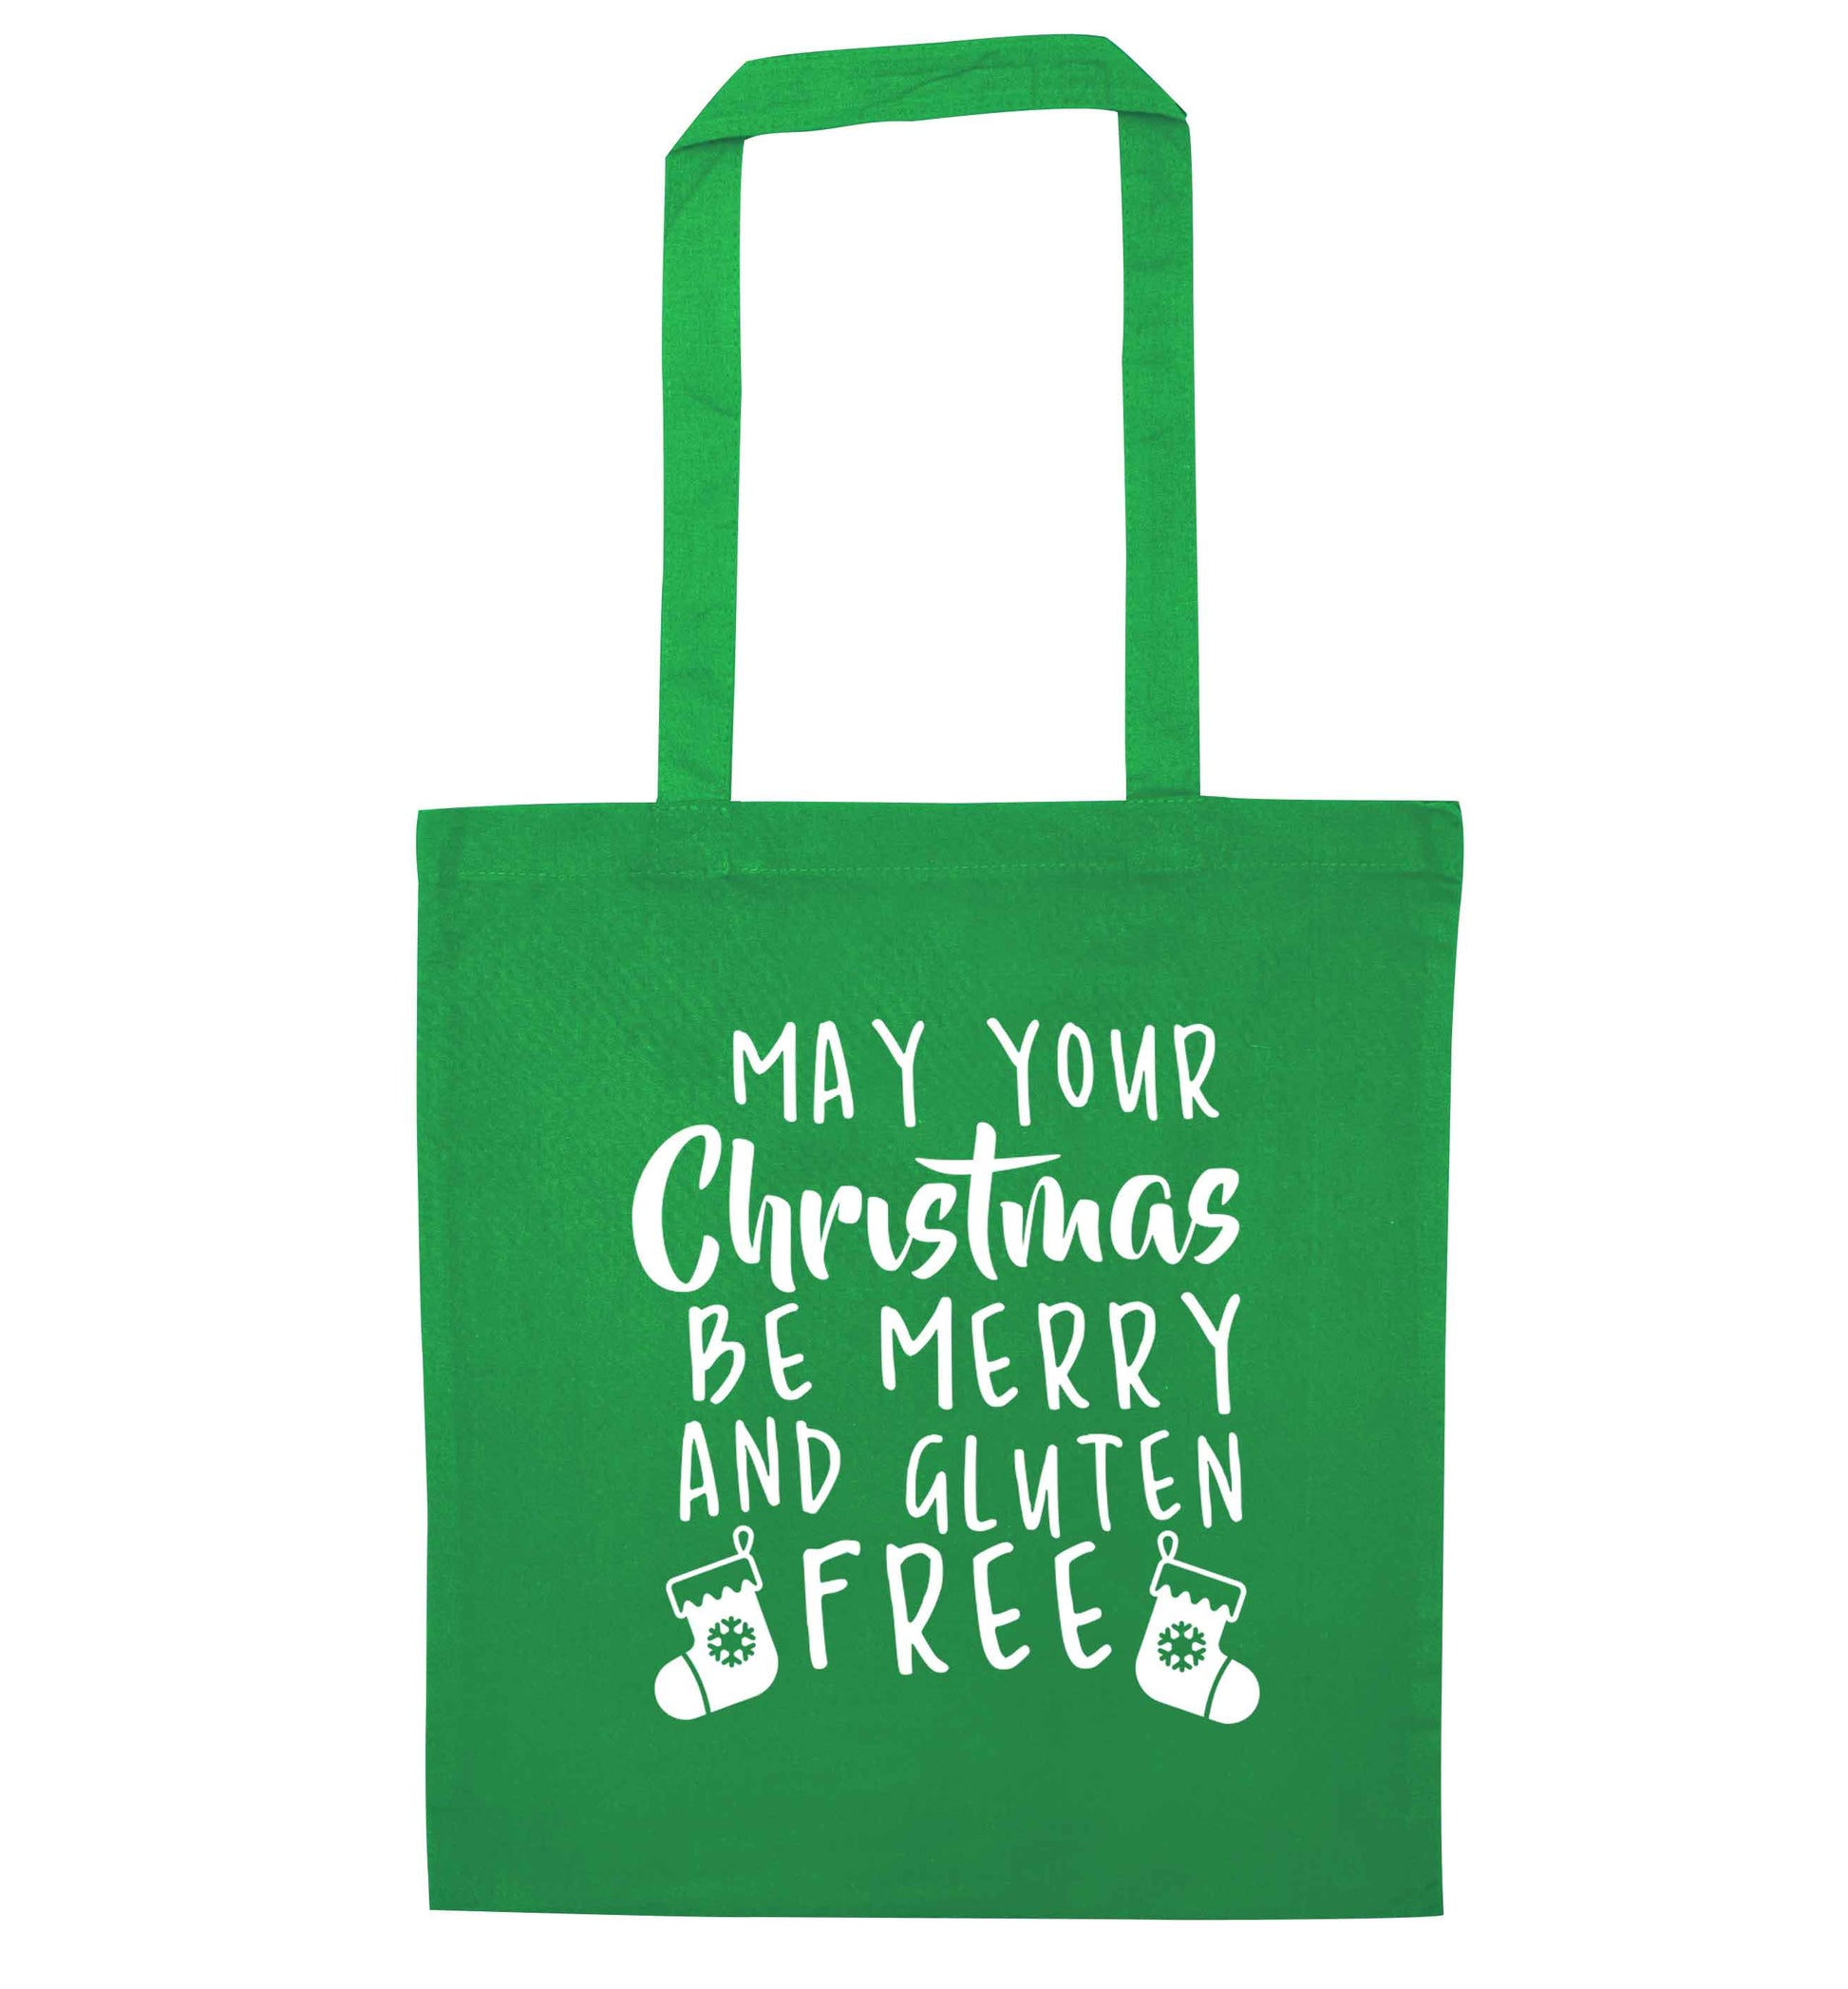 May your Christmas be merry and gluten free green tote bag